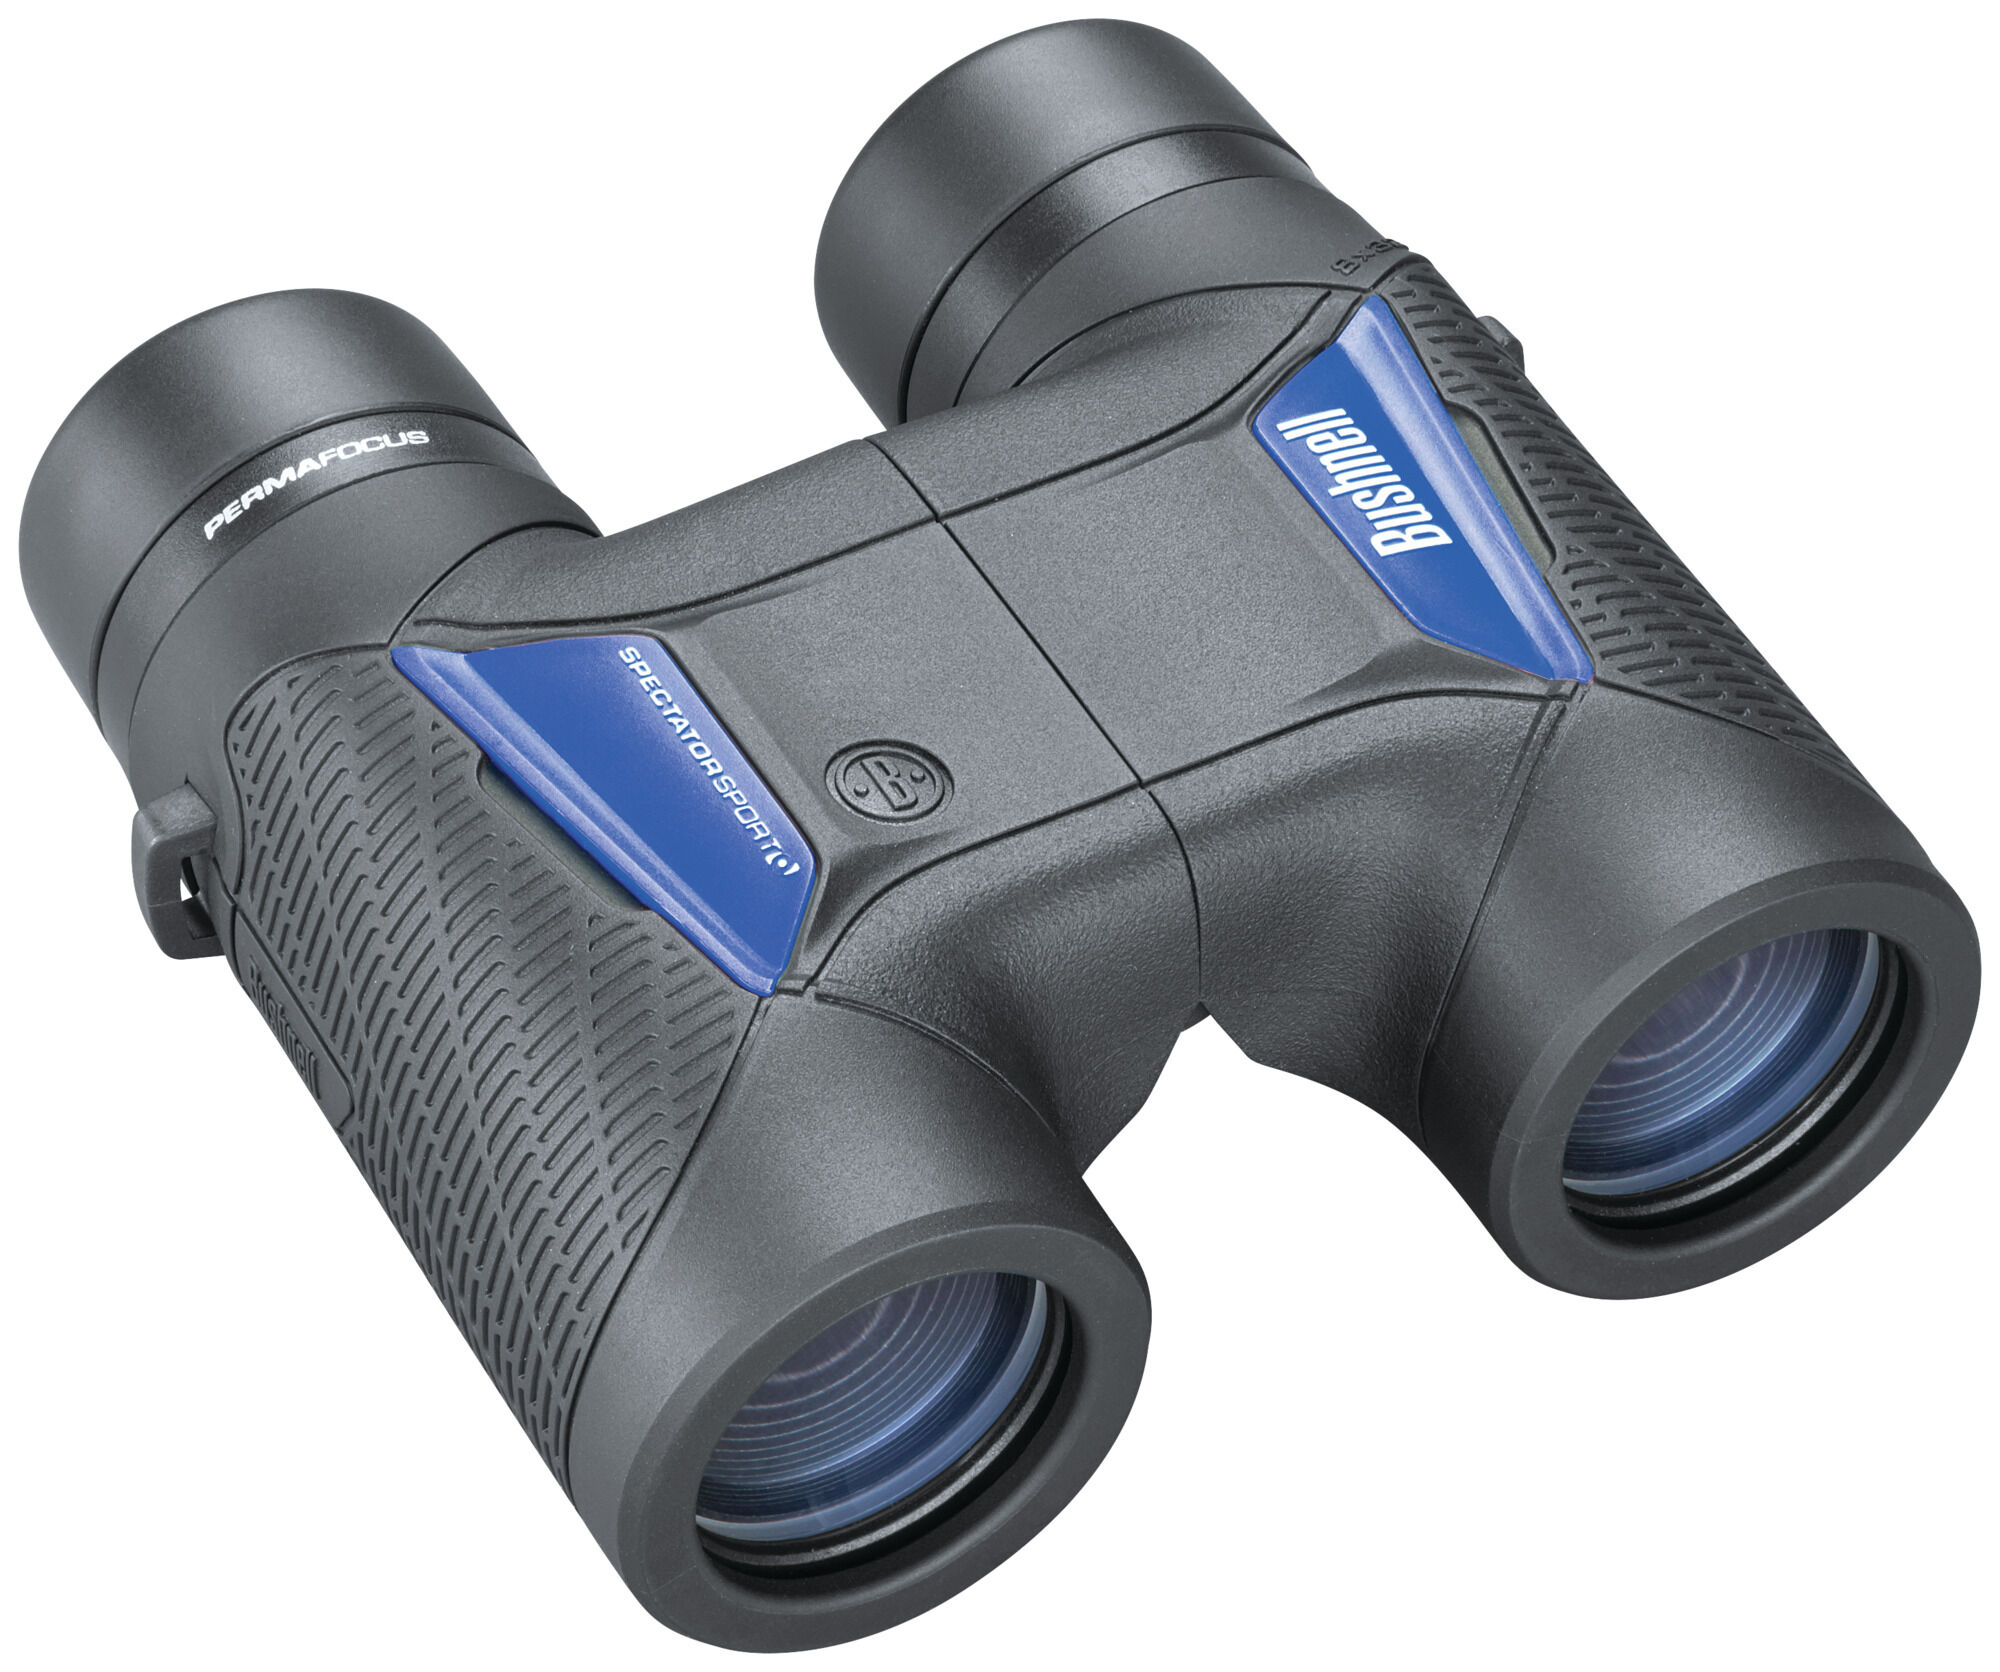 Buy Spectator Sport Binoculars and More. Shop Today For All of 